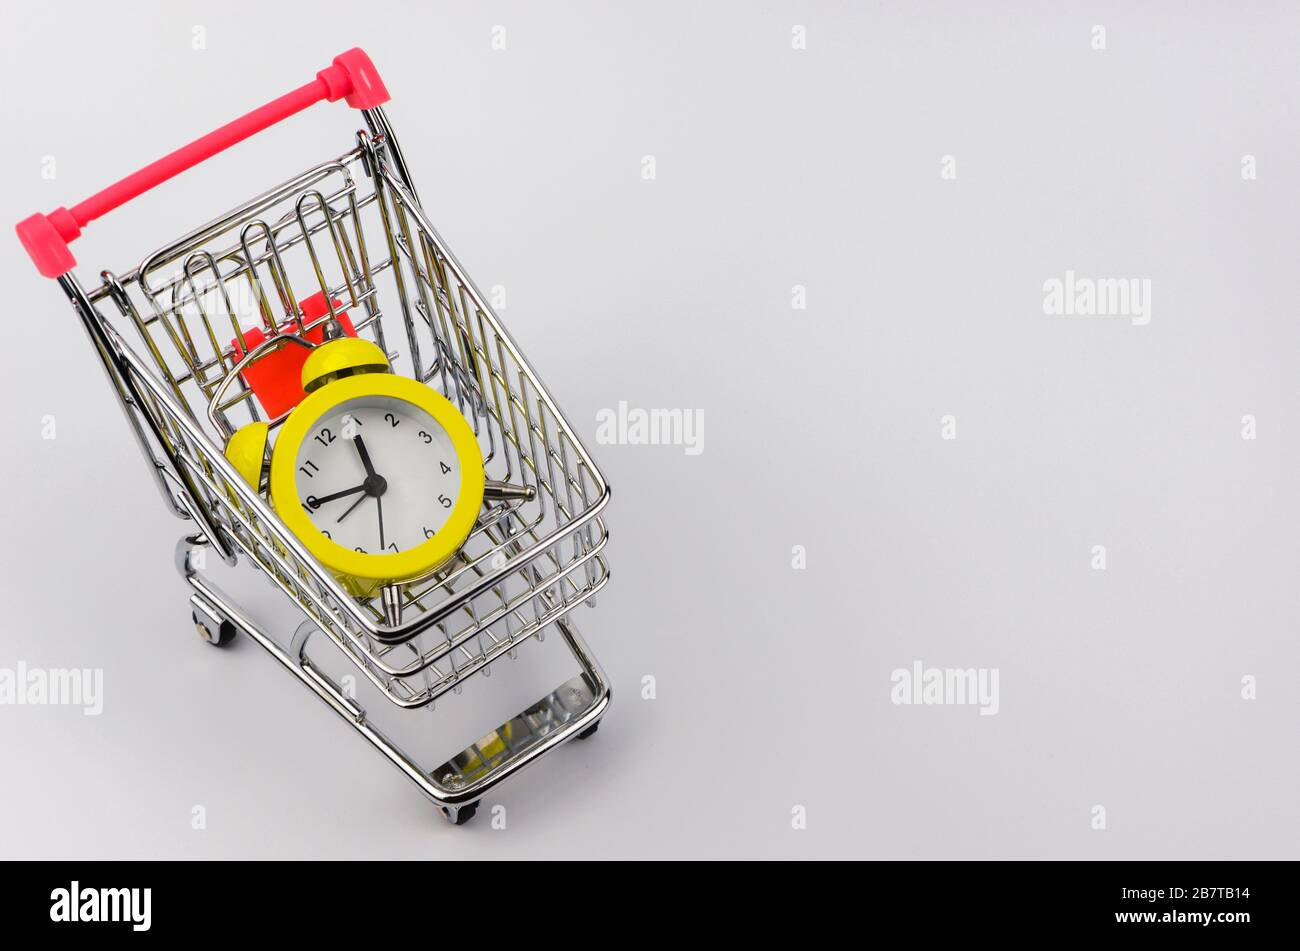 Yellow alarm clock in a shopping trolley 3 Stock Photo